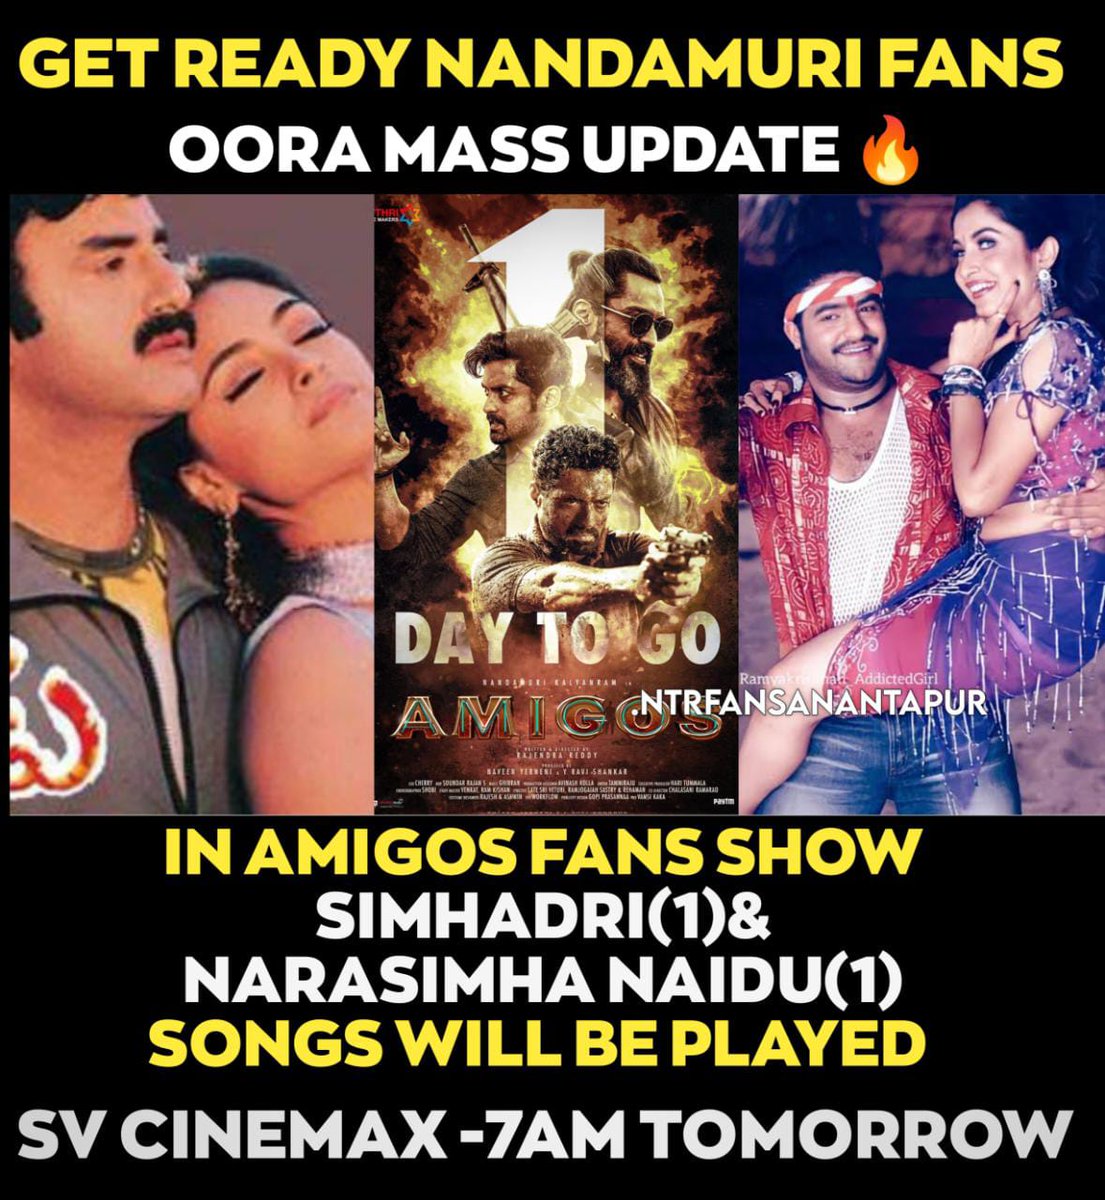 Onthe Occasion of AmigosOnFeb10th Anantapur Nandamuri Fans Are Planning to Play For Video Songs in SV CINEMAX. 🔥

And Finally fixed 🚨✌🤙

1. Narasimhanaidu  - Ninna Kuttesi⏳
2. Simhadri  - Chinnadamme Cheekulu Kavala⏳ 
First Time  History in ANANTAPUR
🔥 🔥 🔥 🔥